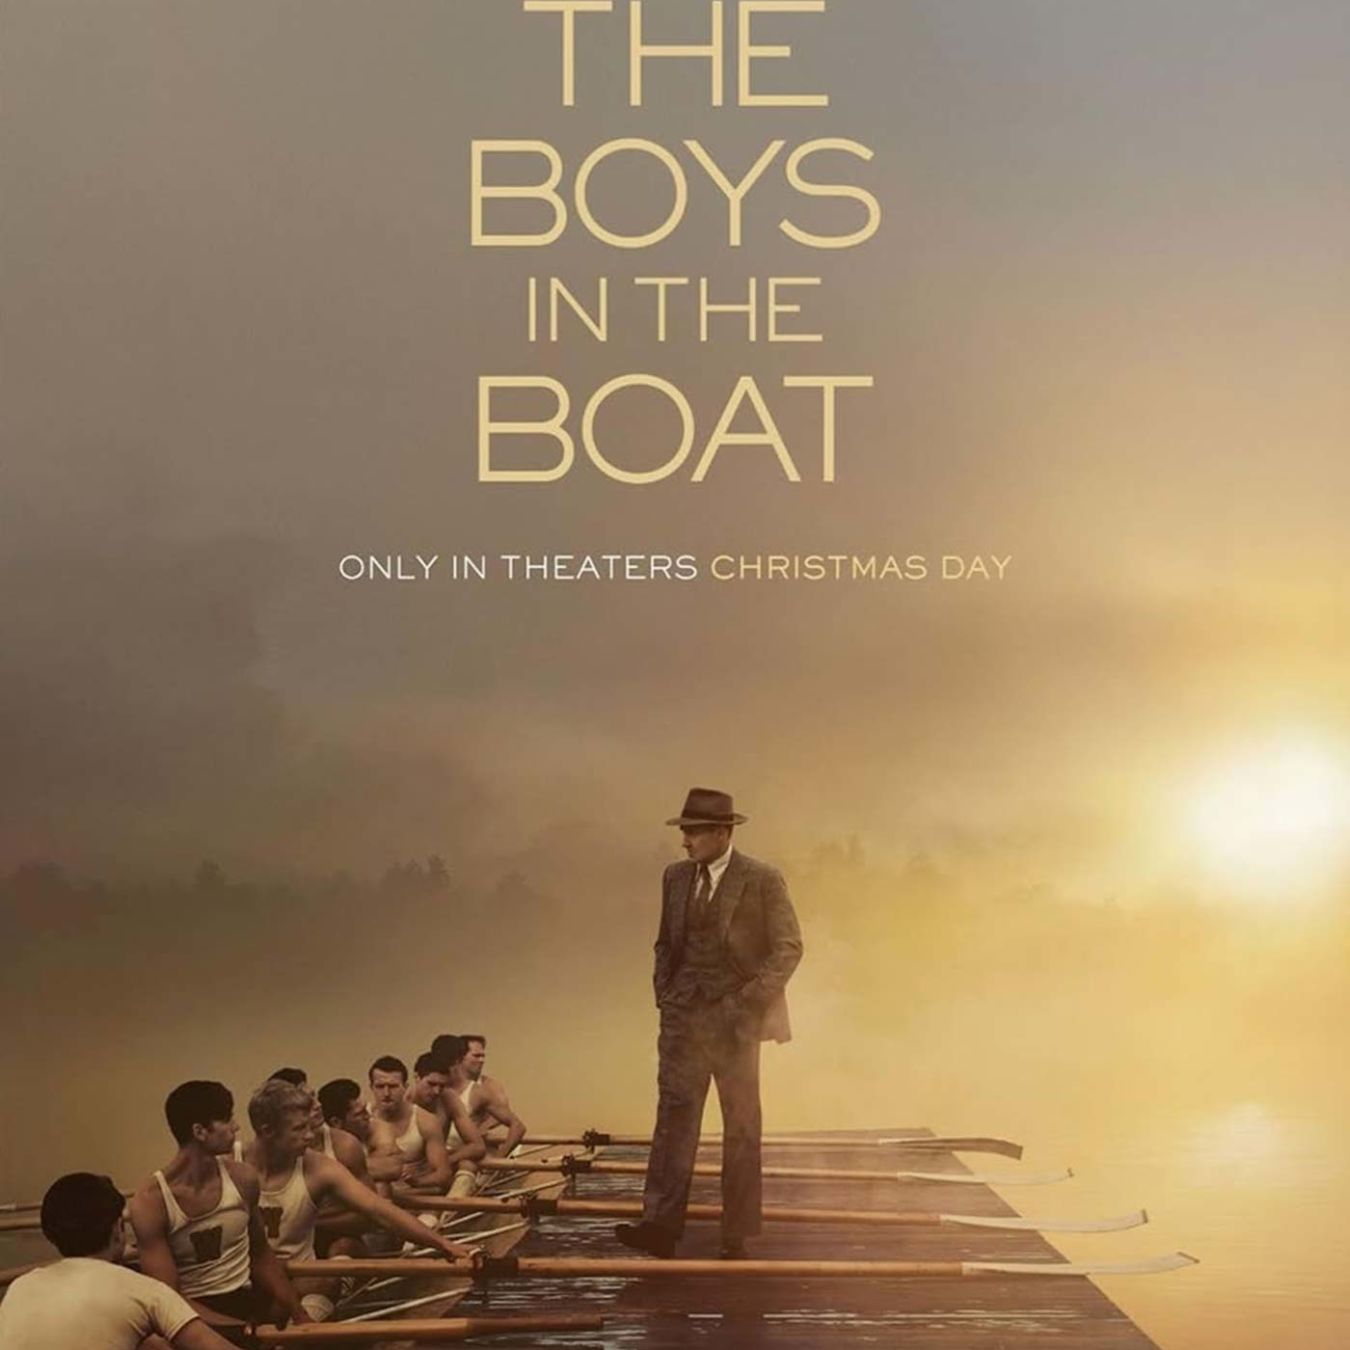 Film poster for The Boys in the Boat shows a rowing 8 in the water with their coach giving instruction from the side